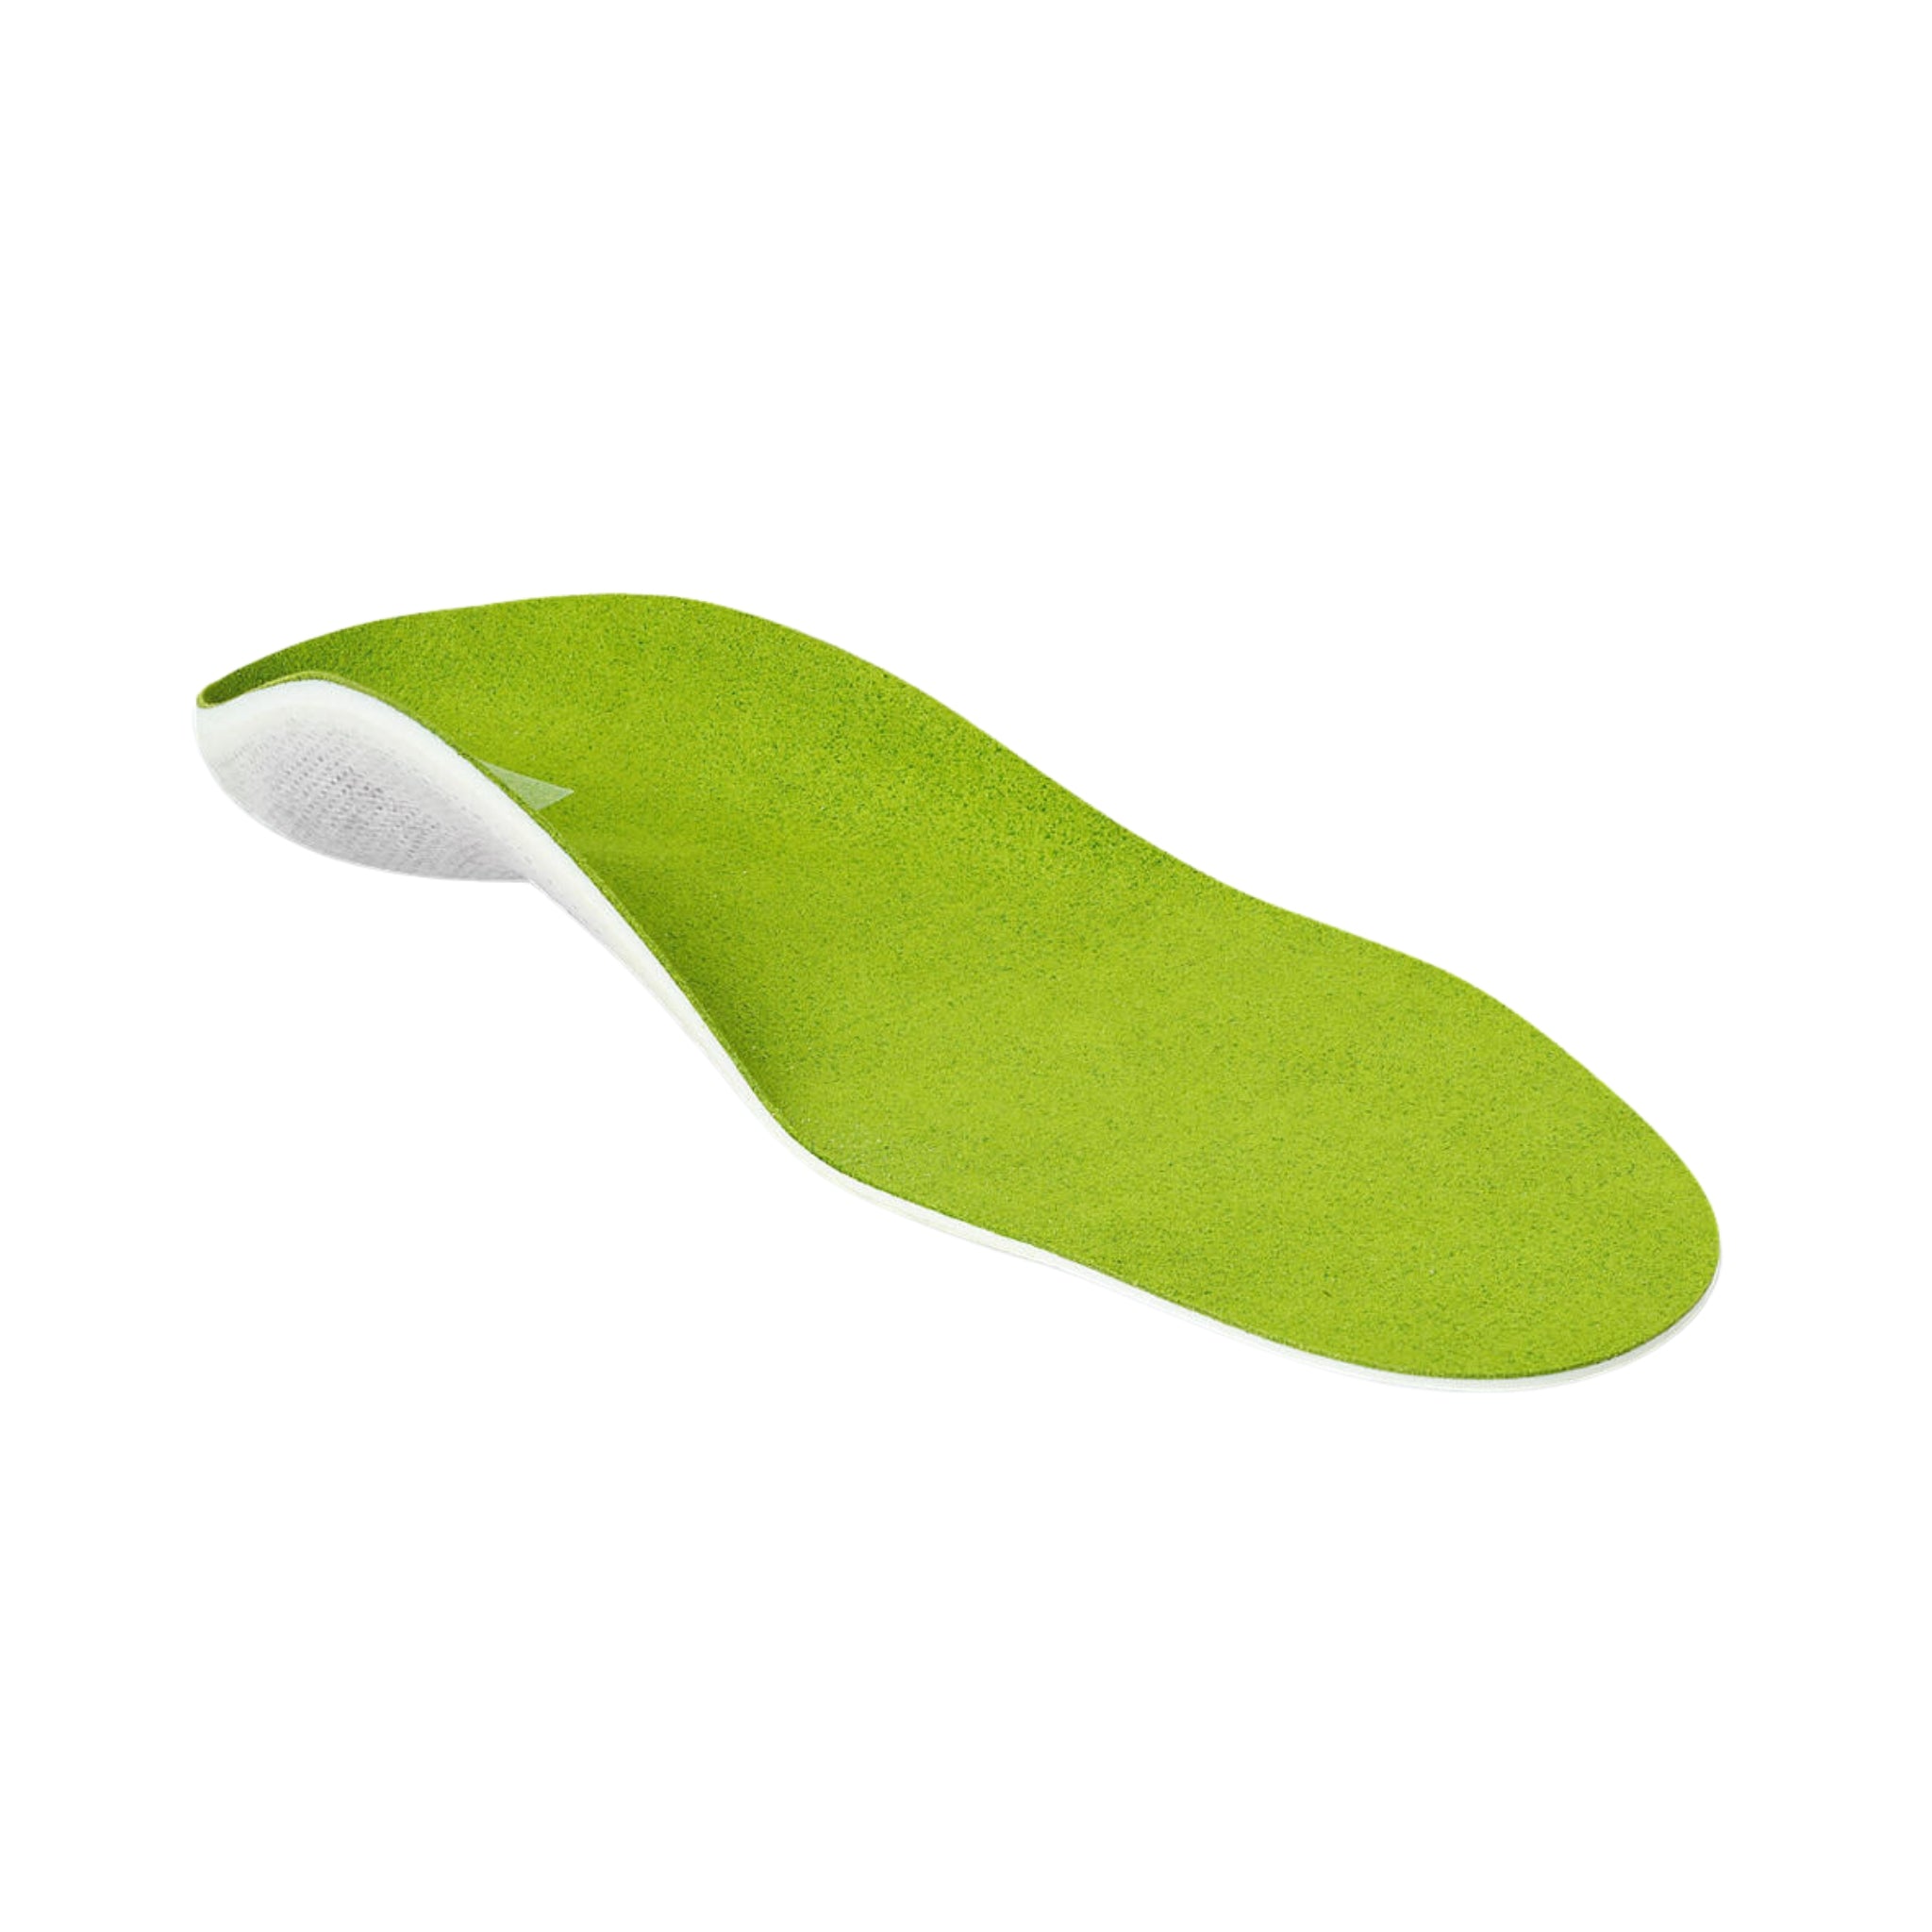 Foot Support Junior | Medical Shoe Insoles for Children